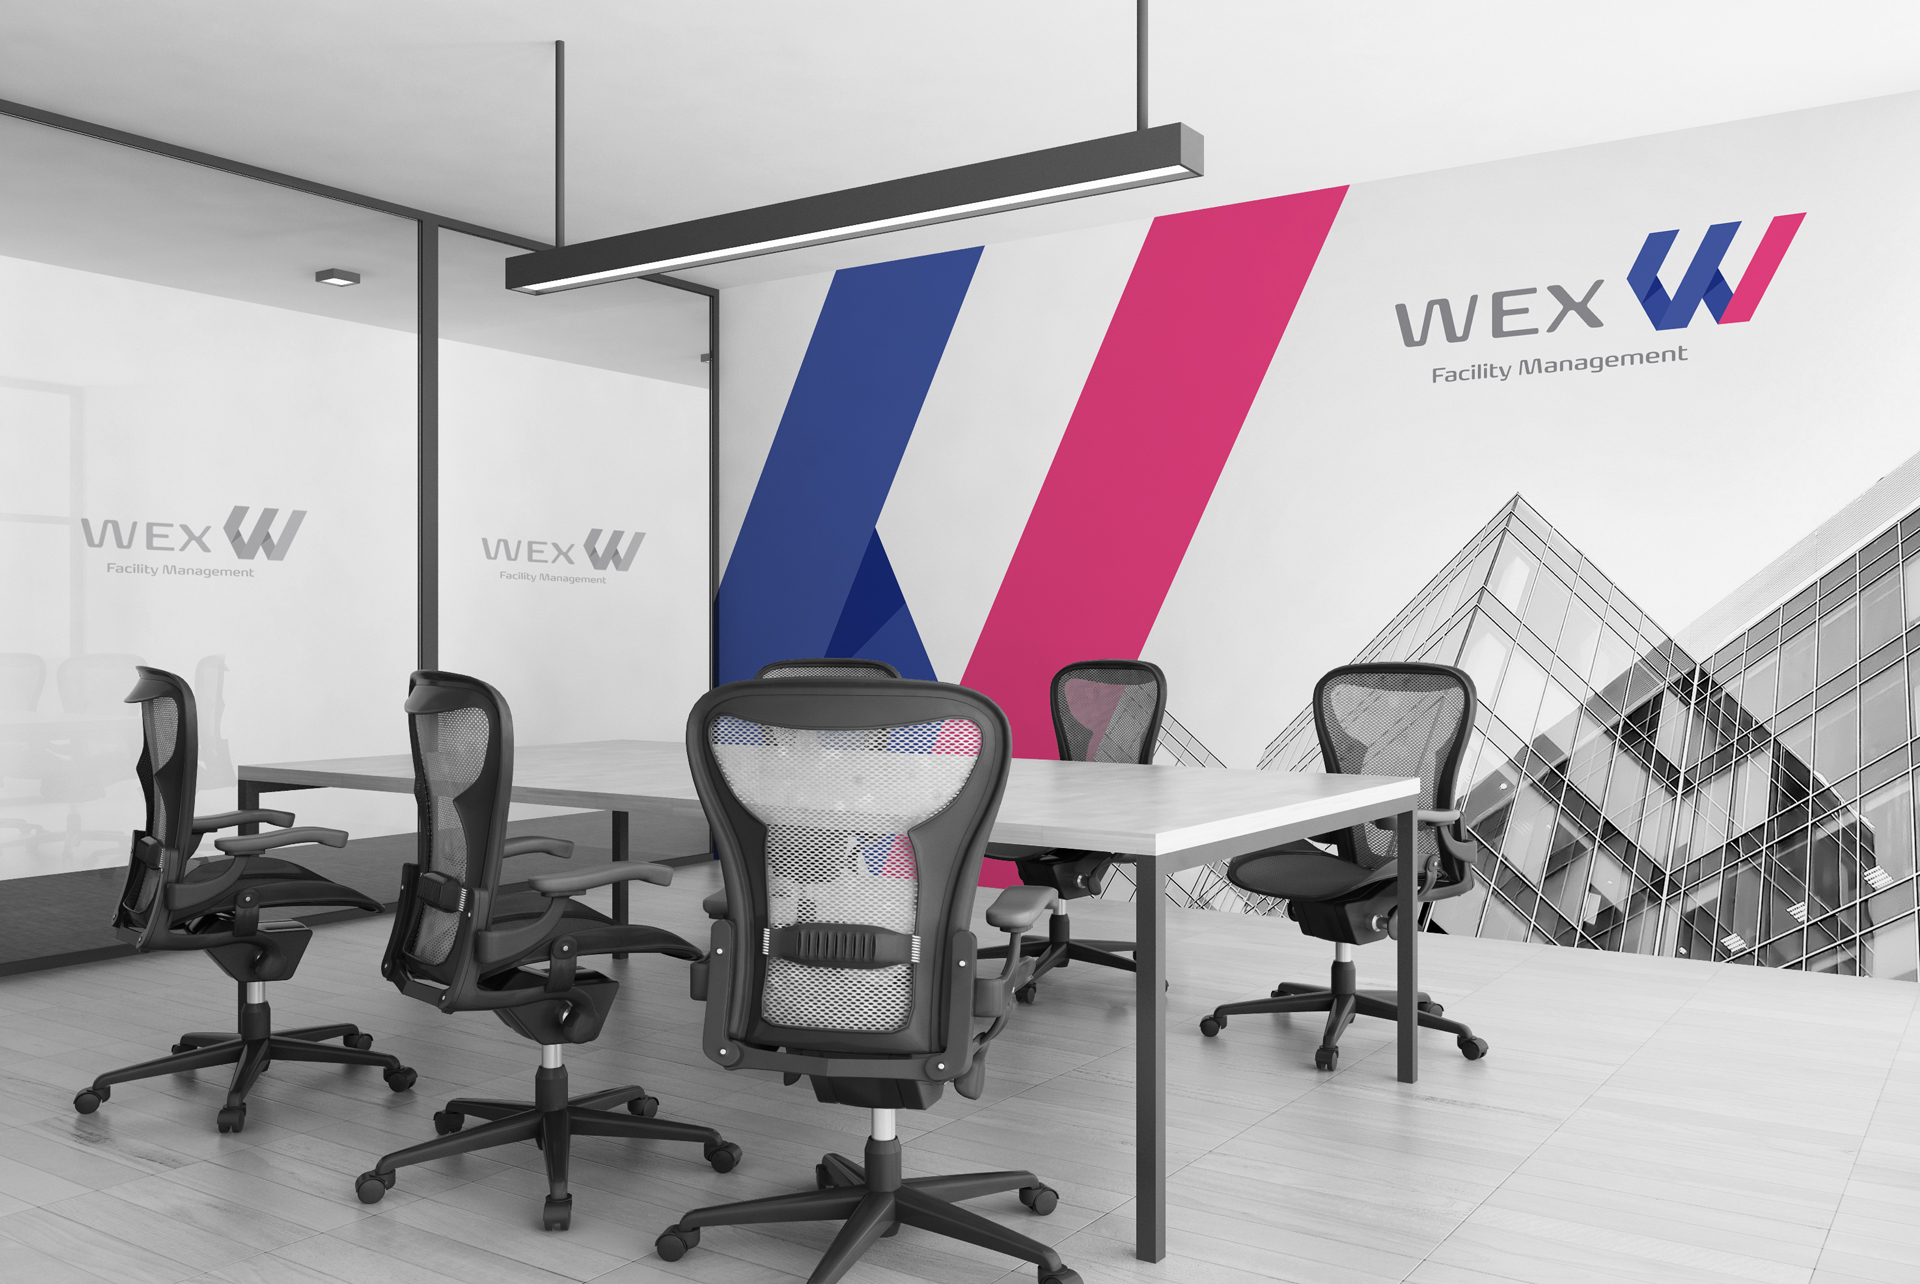 WEX Facility Management Room Wall Branding